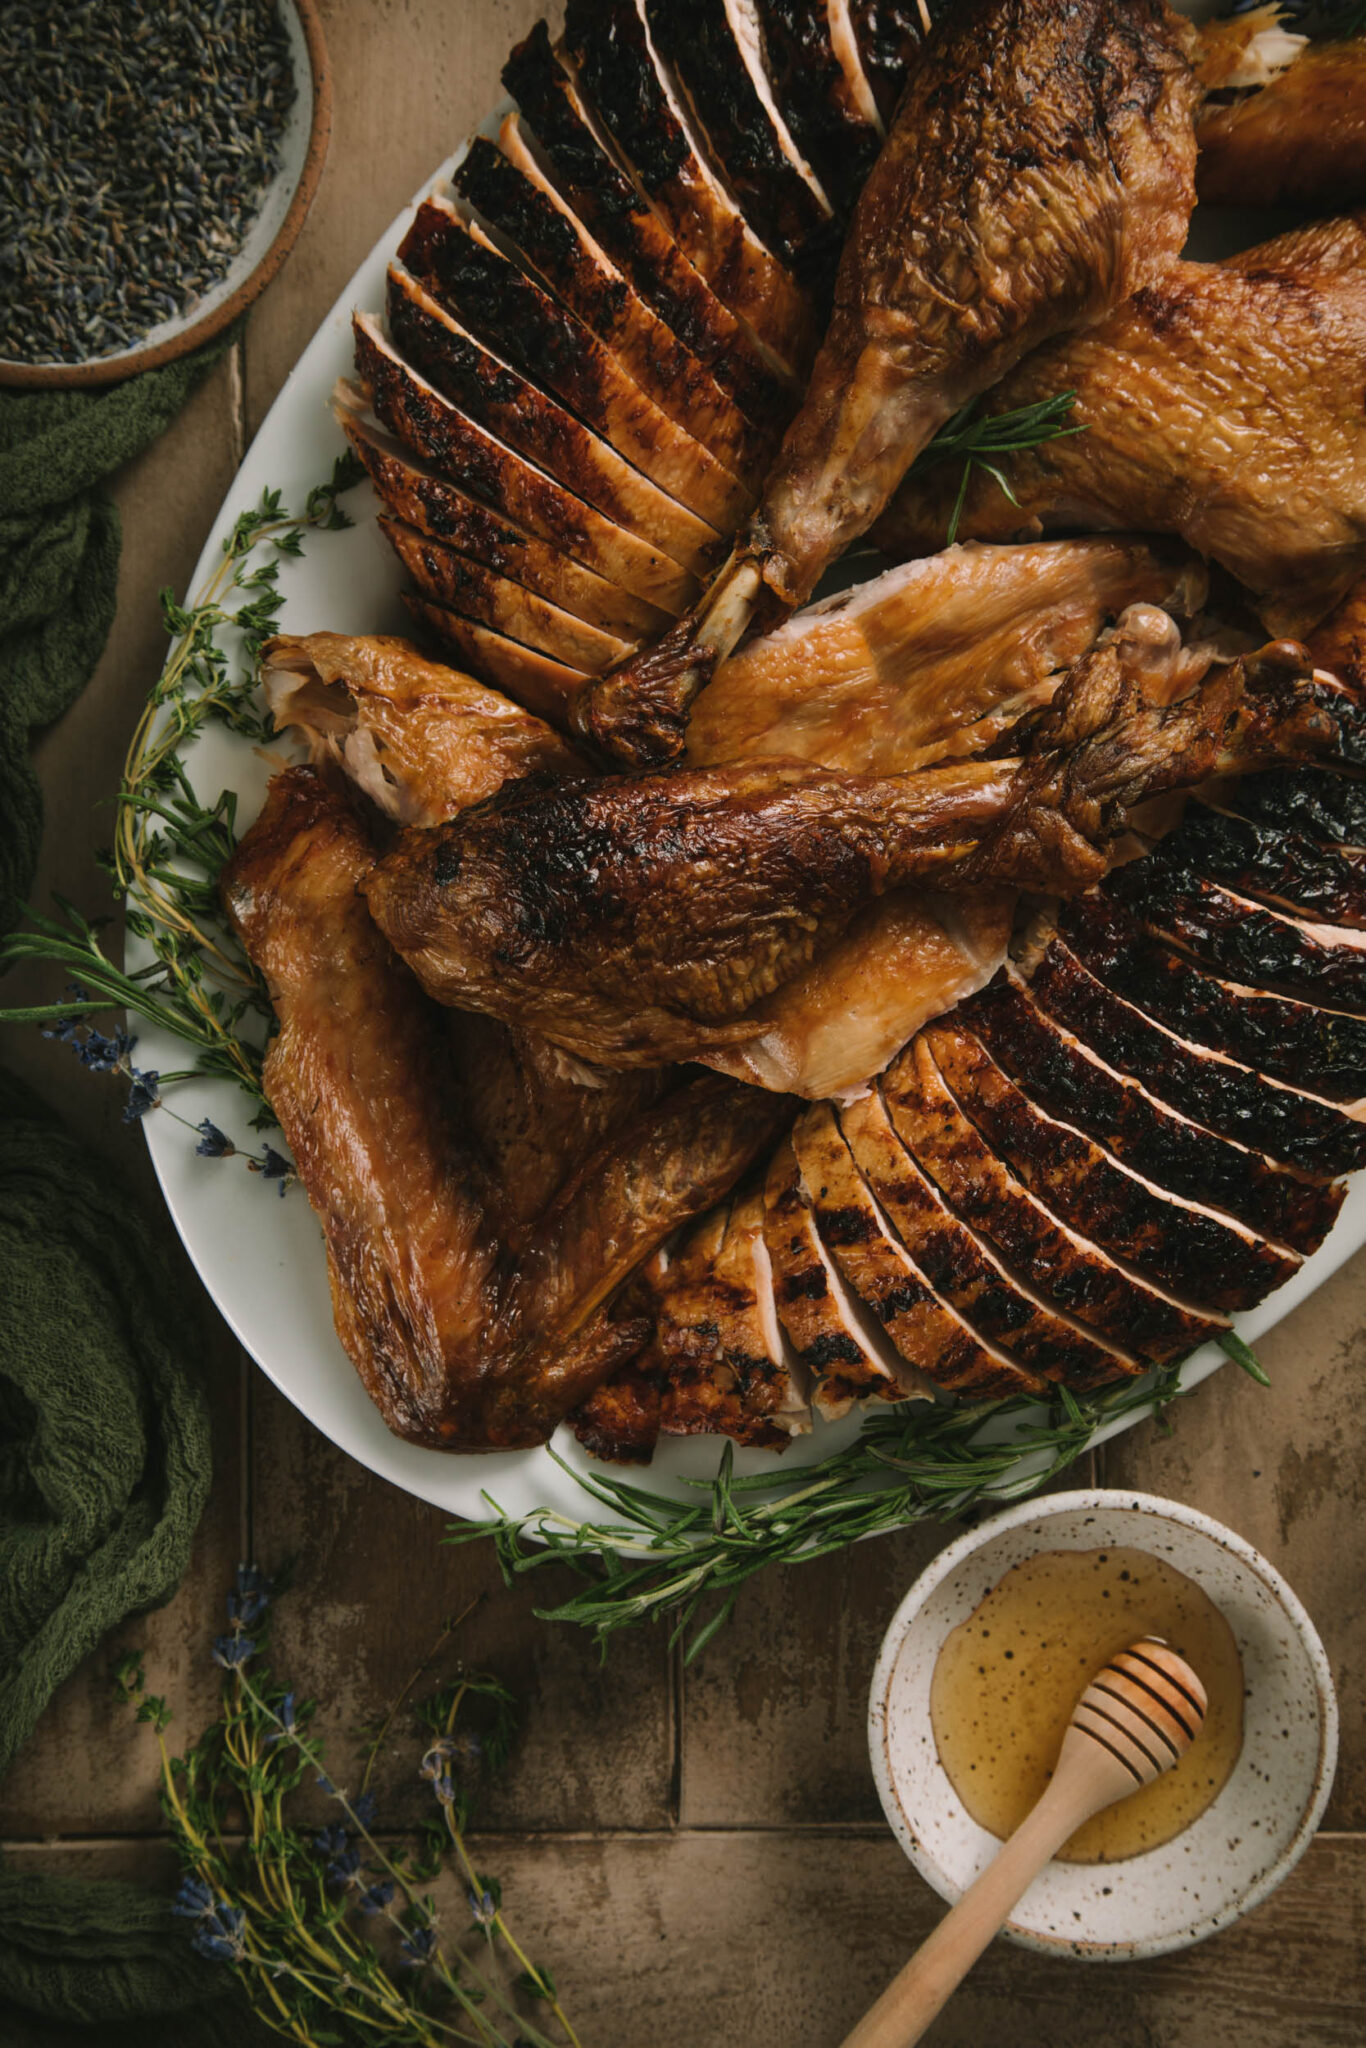 Overhead view of fully carved turkey on a rustic wood surface. Turkey is on a while serving plate. A small bowl of honey is to the right, and a dark green linen to the left.